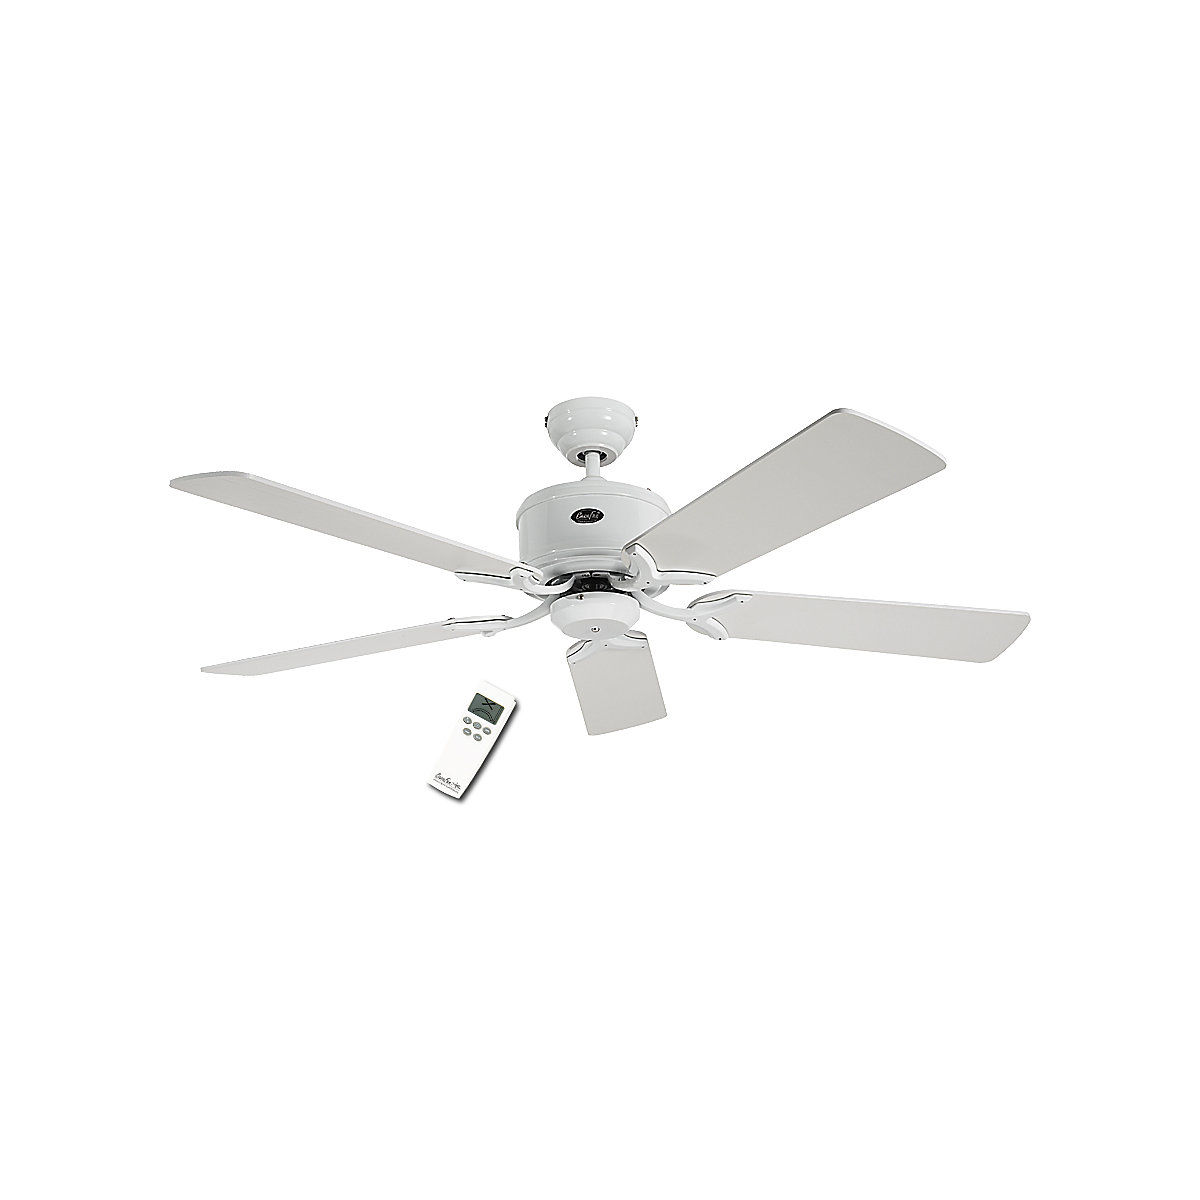 ECO ELEMENTS ceiling fan, rotor blade Ø 1320 mm, painted white / painted light grey-3